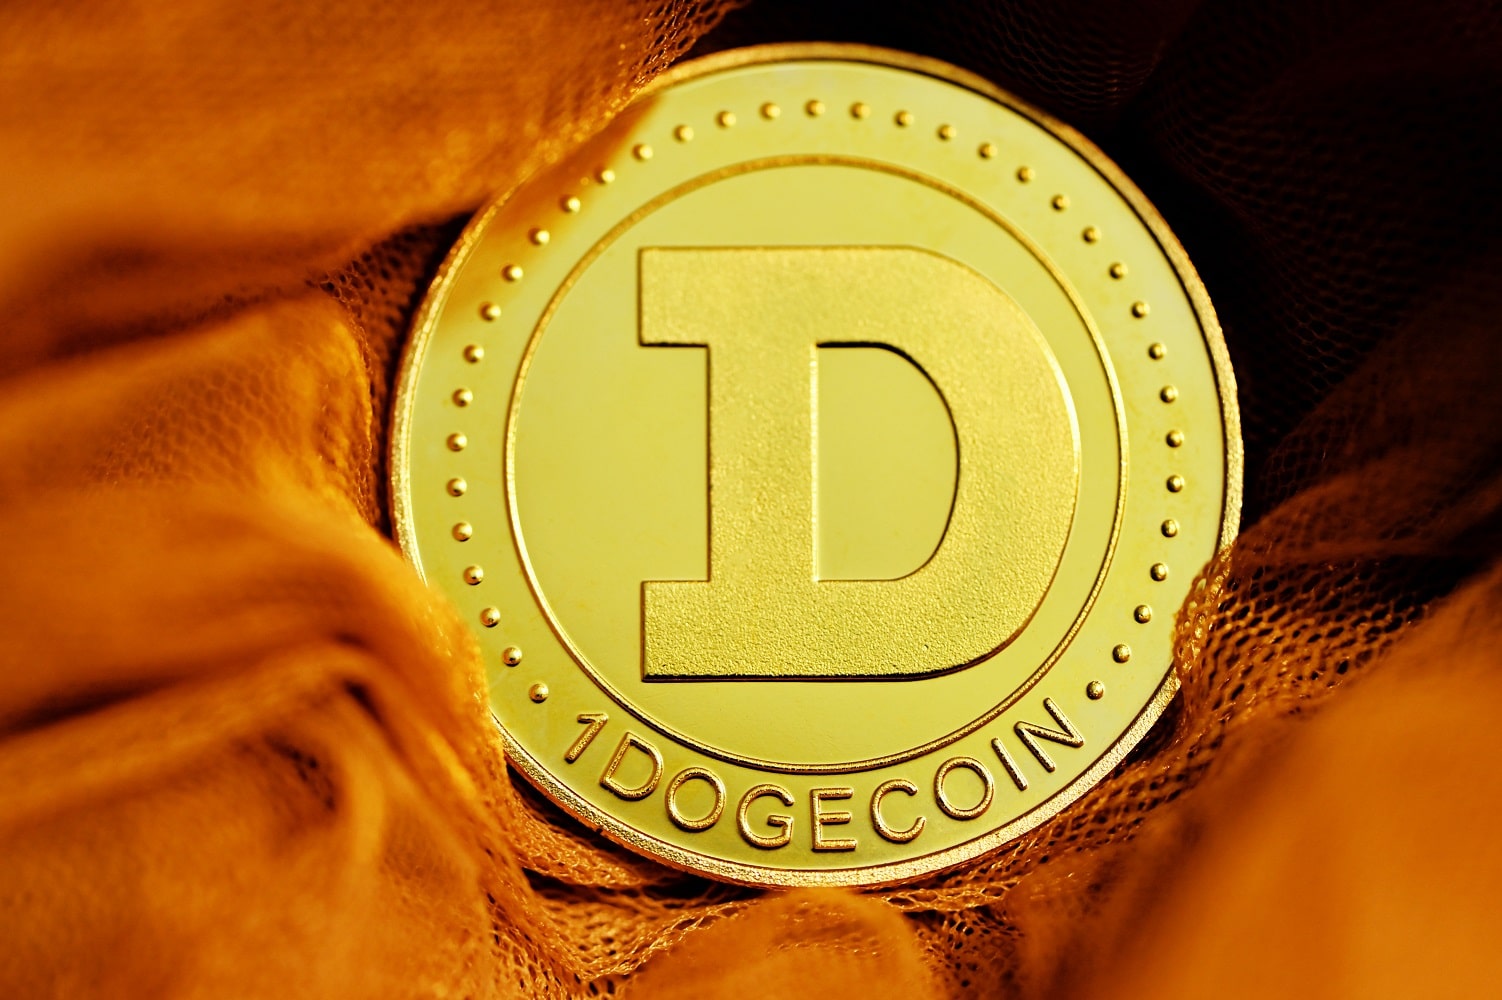 Netflix Filmmaker’s Dogecoin Gamble: From Movie Budget to Crypto Fortune